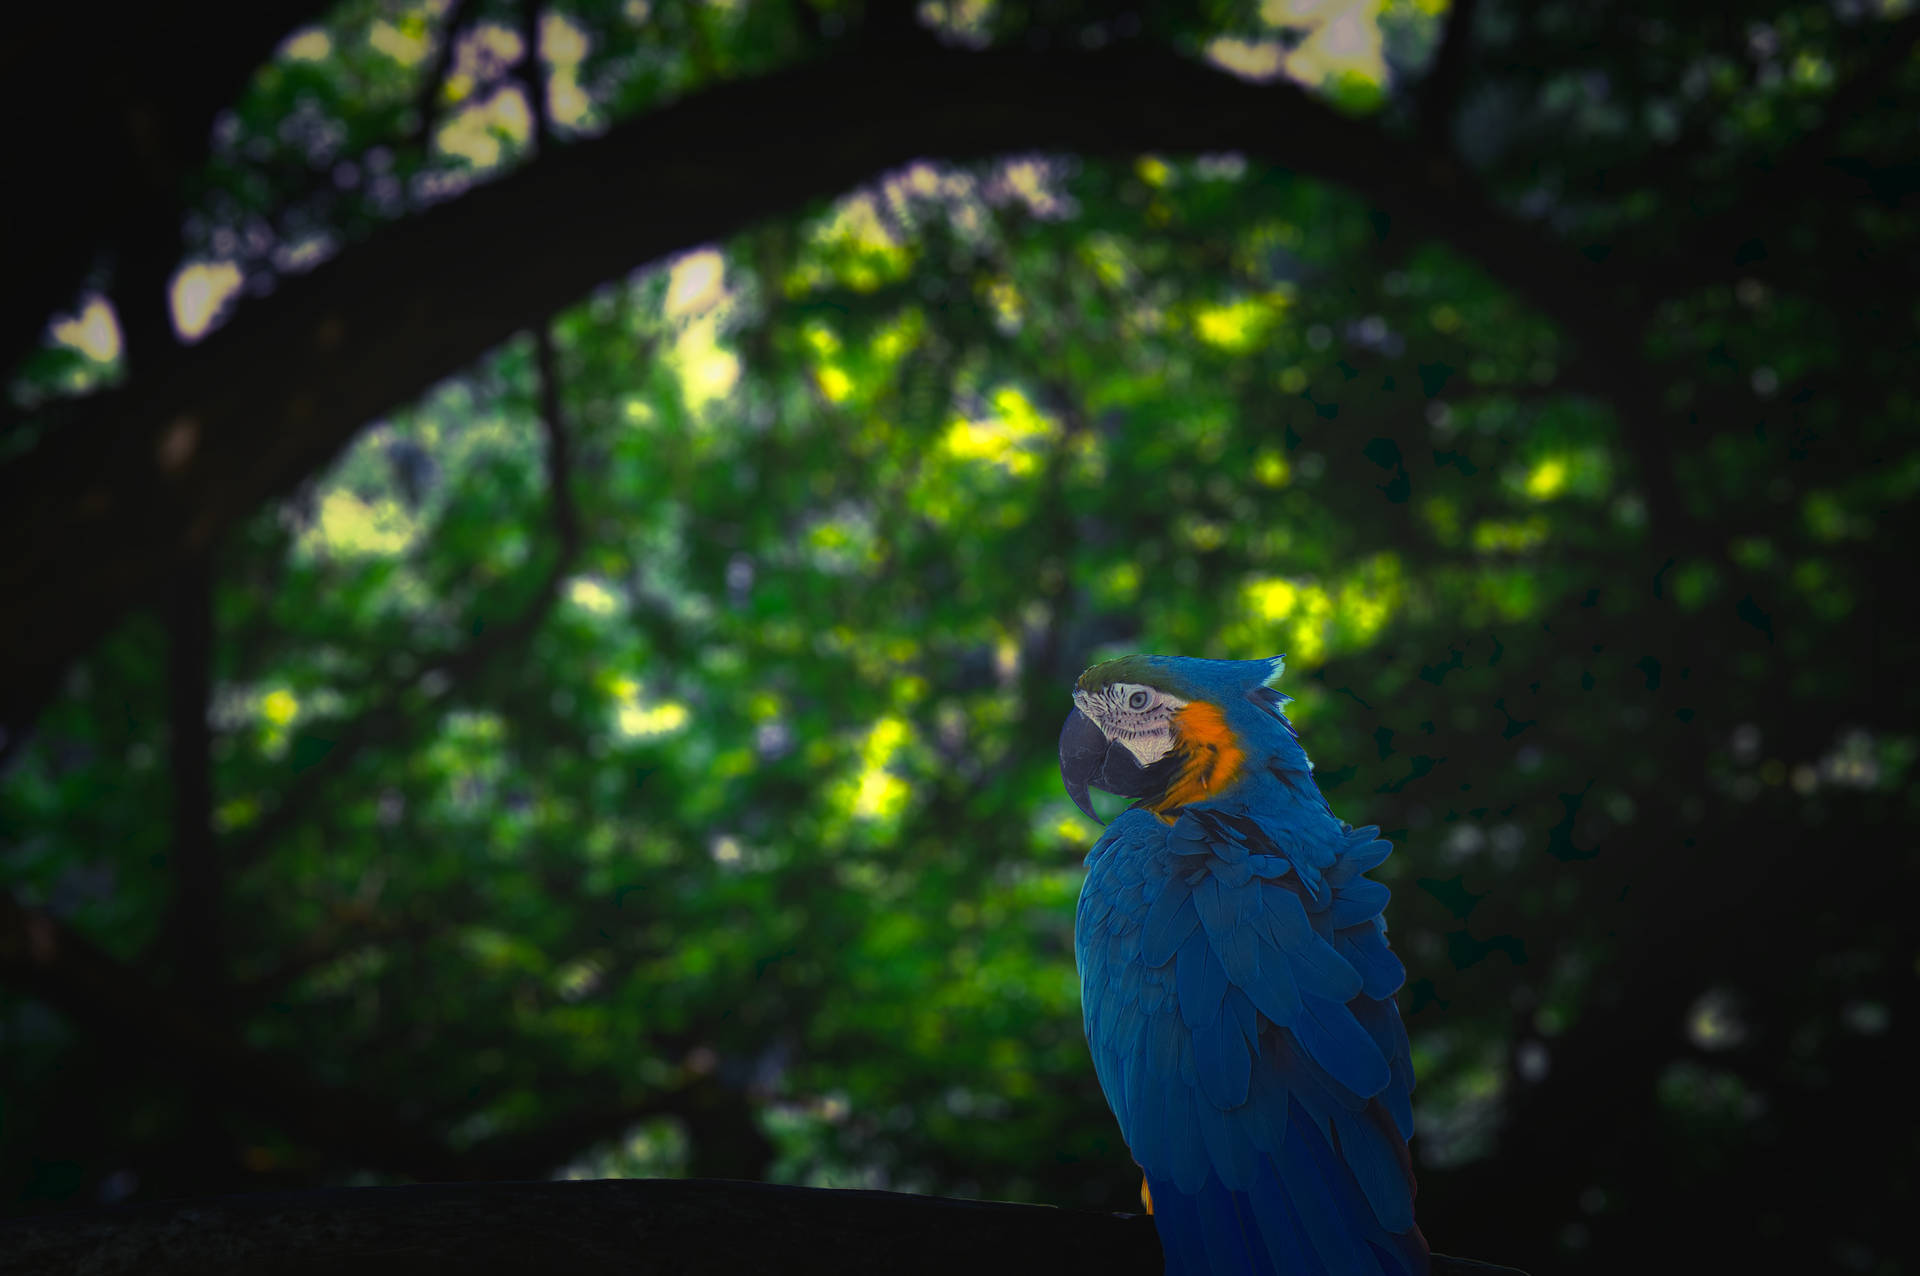 Take a Closer Look at the Majestic Blue Macaw Parrot in its Natural Jungle Habitat Wallpaper